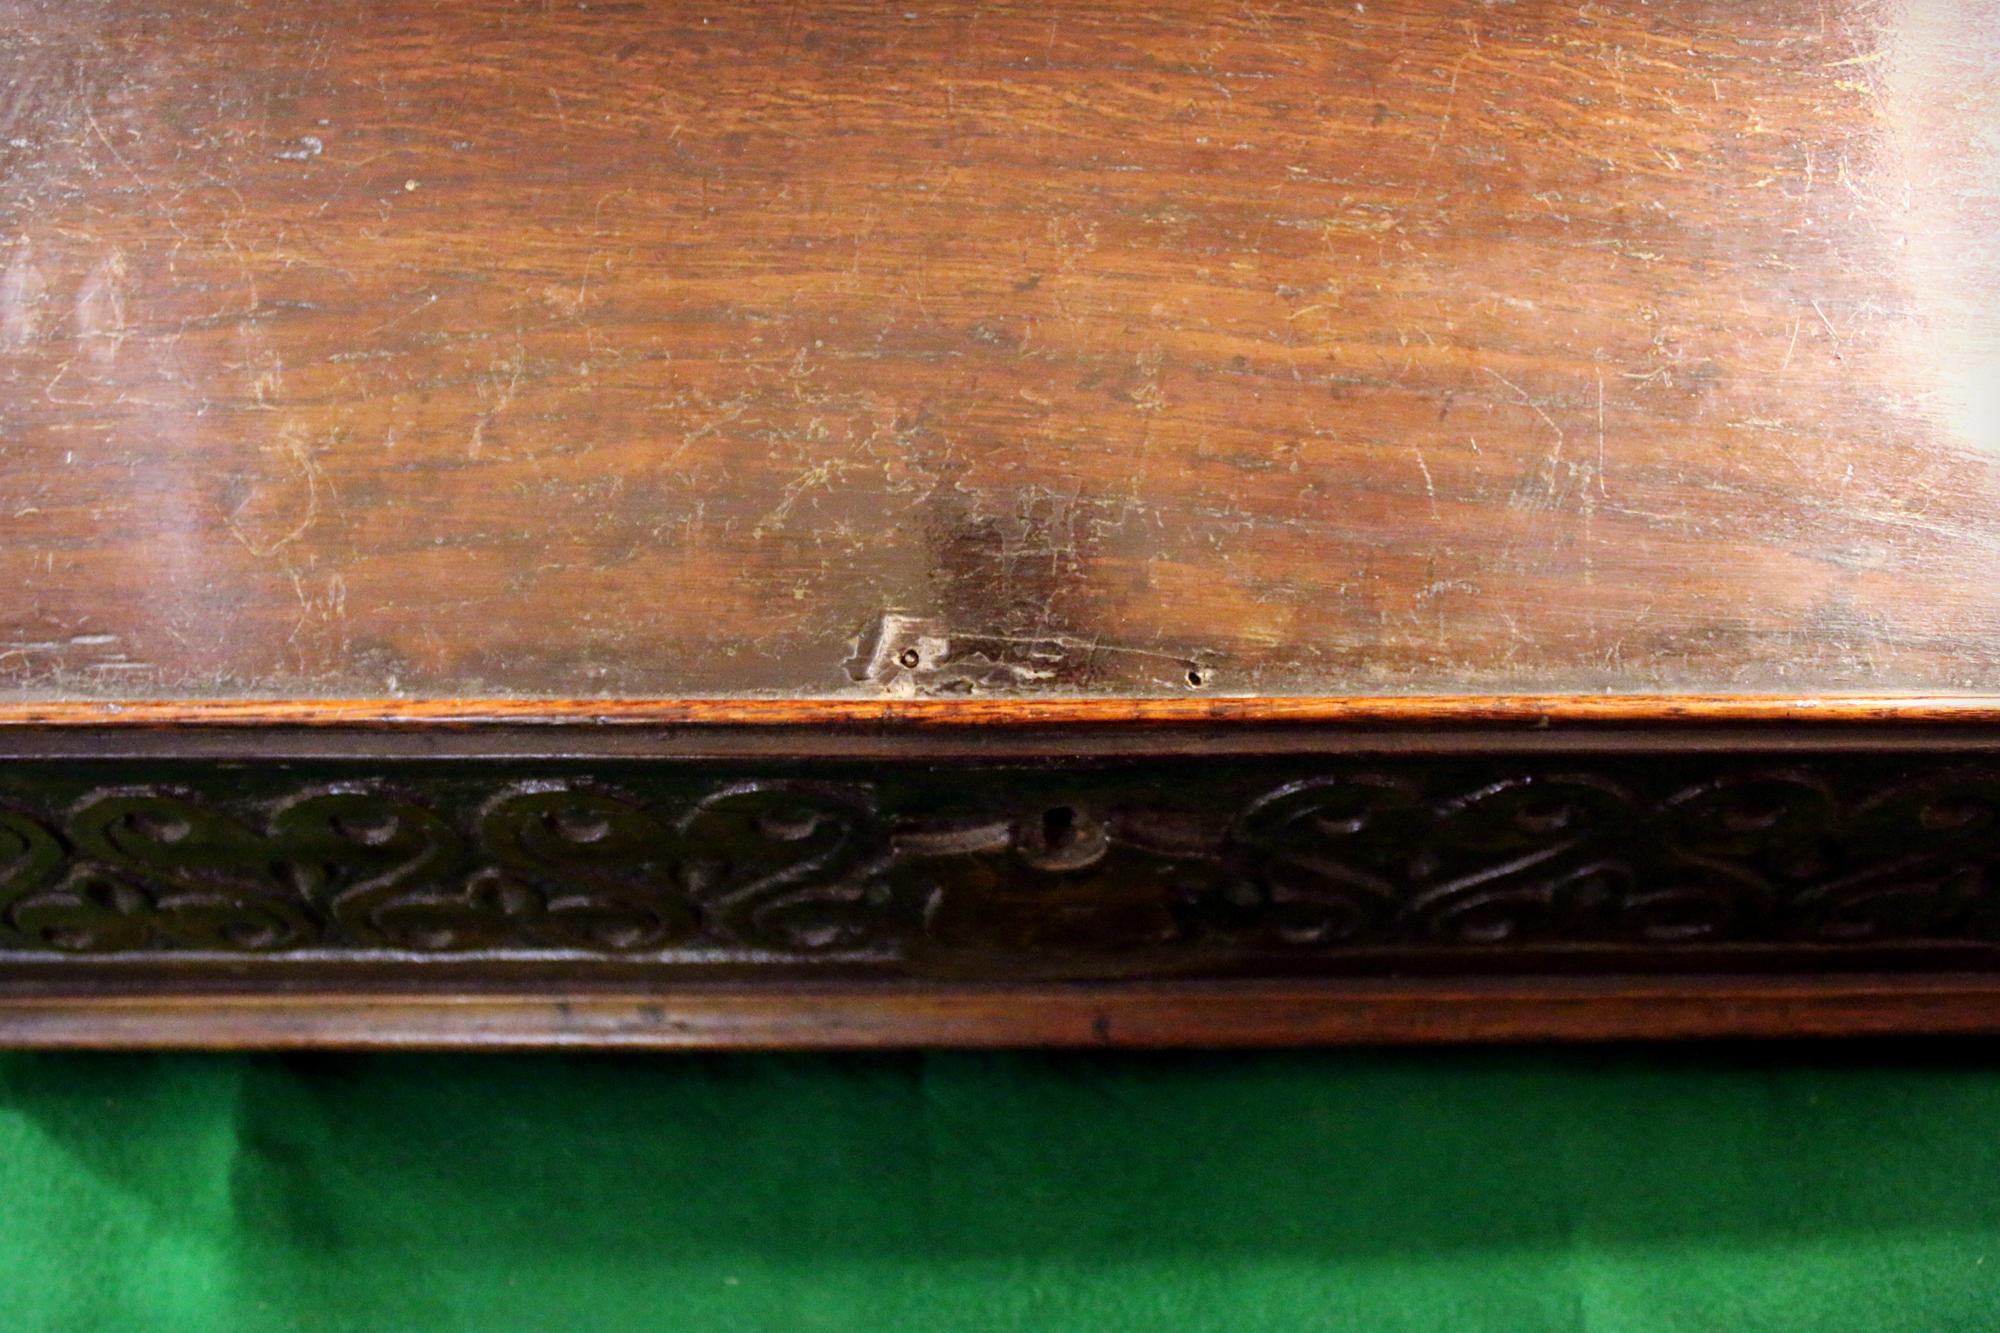 English Bible box or writing box of solid oak with hand carved design and shield in front. Slant top with ledge feature on the inside. Bun feet.
Remnants of paper on the underside of the lid.
See measurements below.